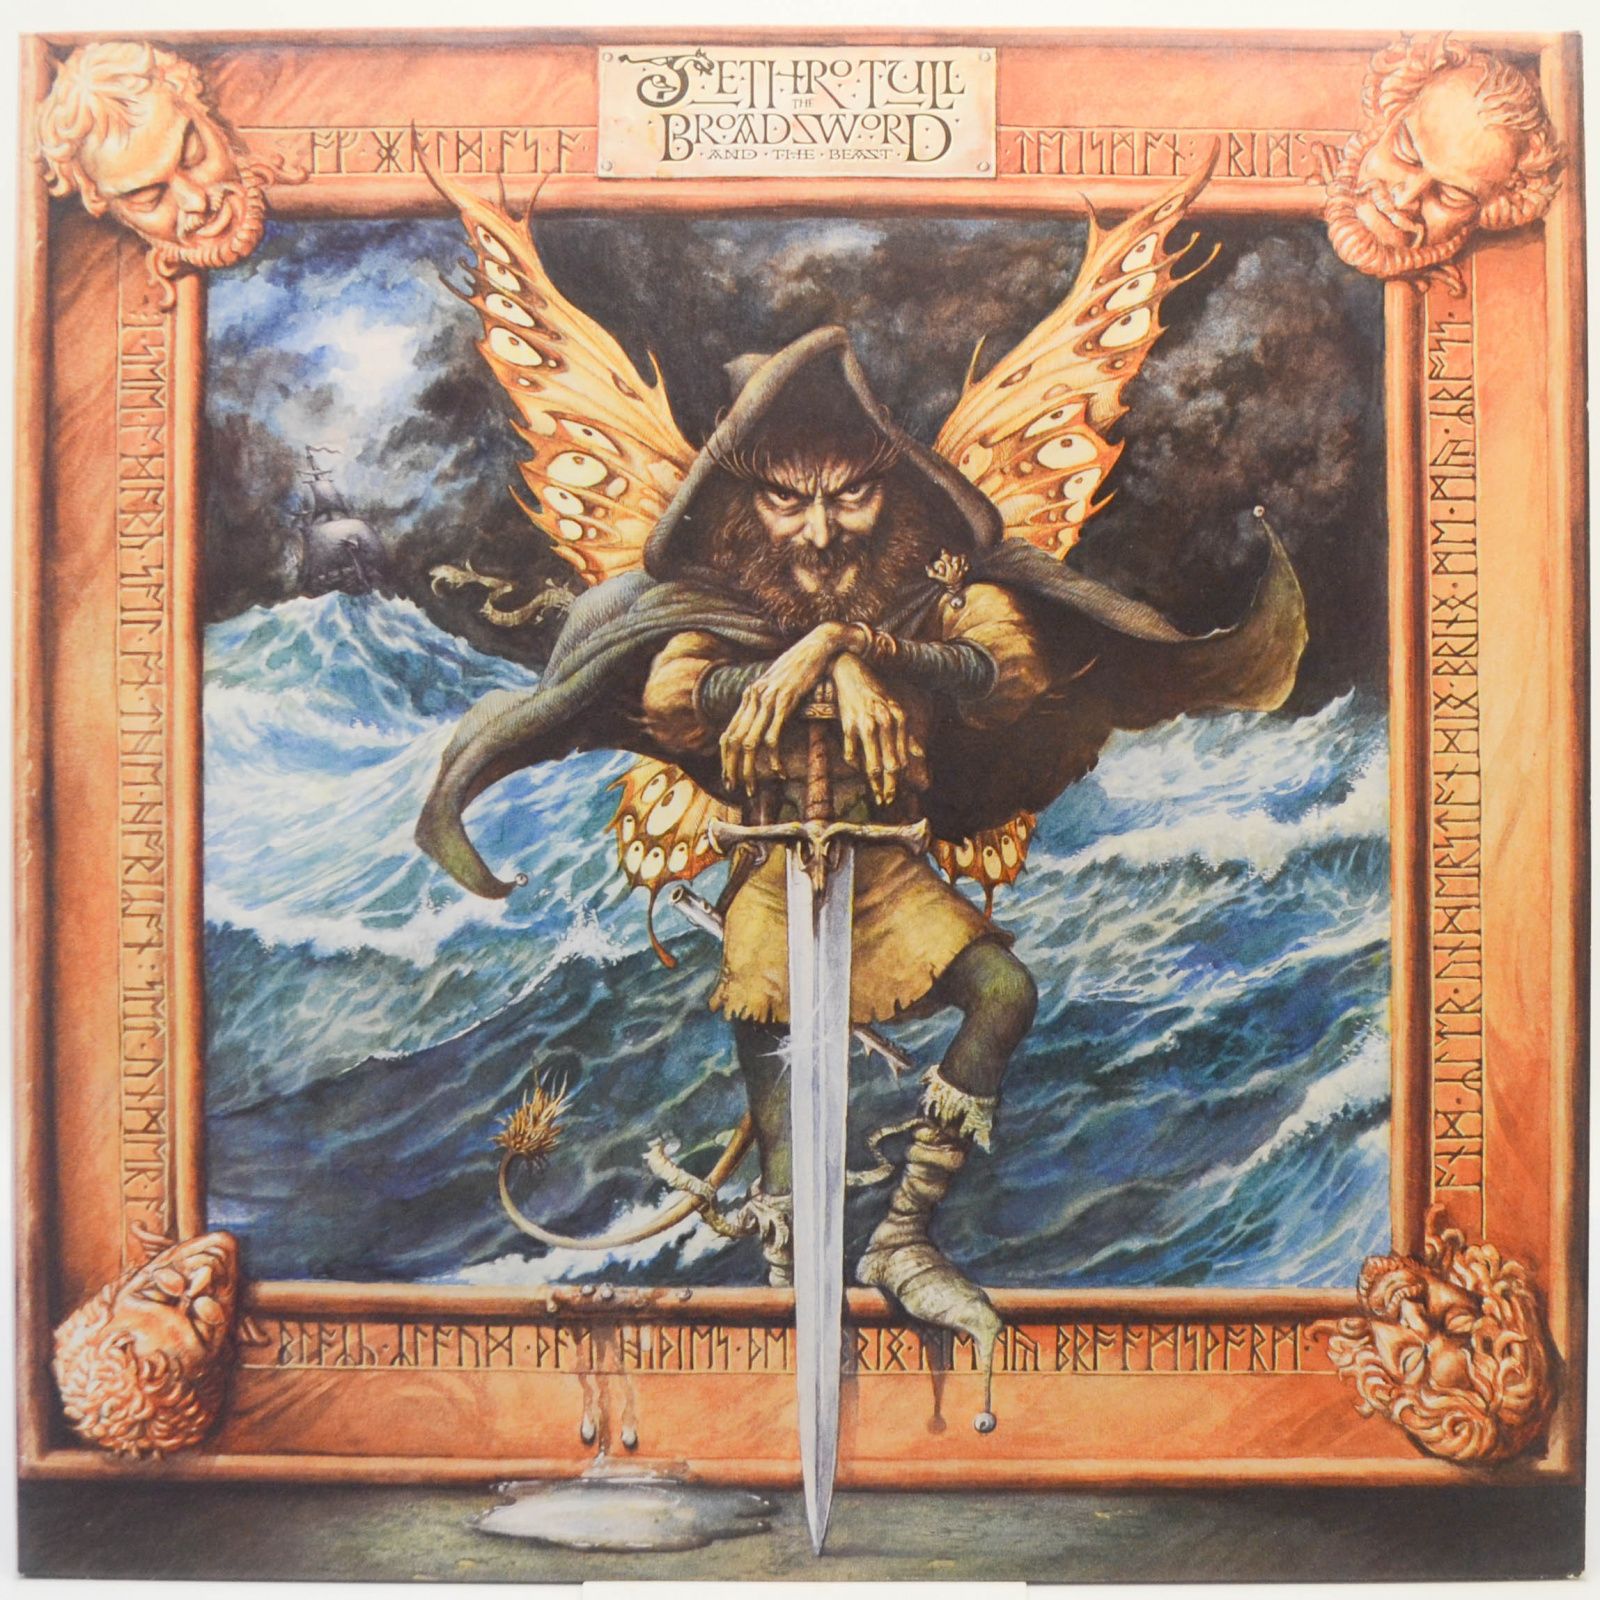 Jethro Tull — The Broadsword And The Beast, 1982